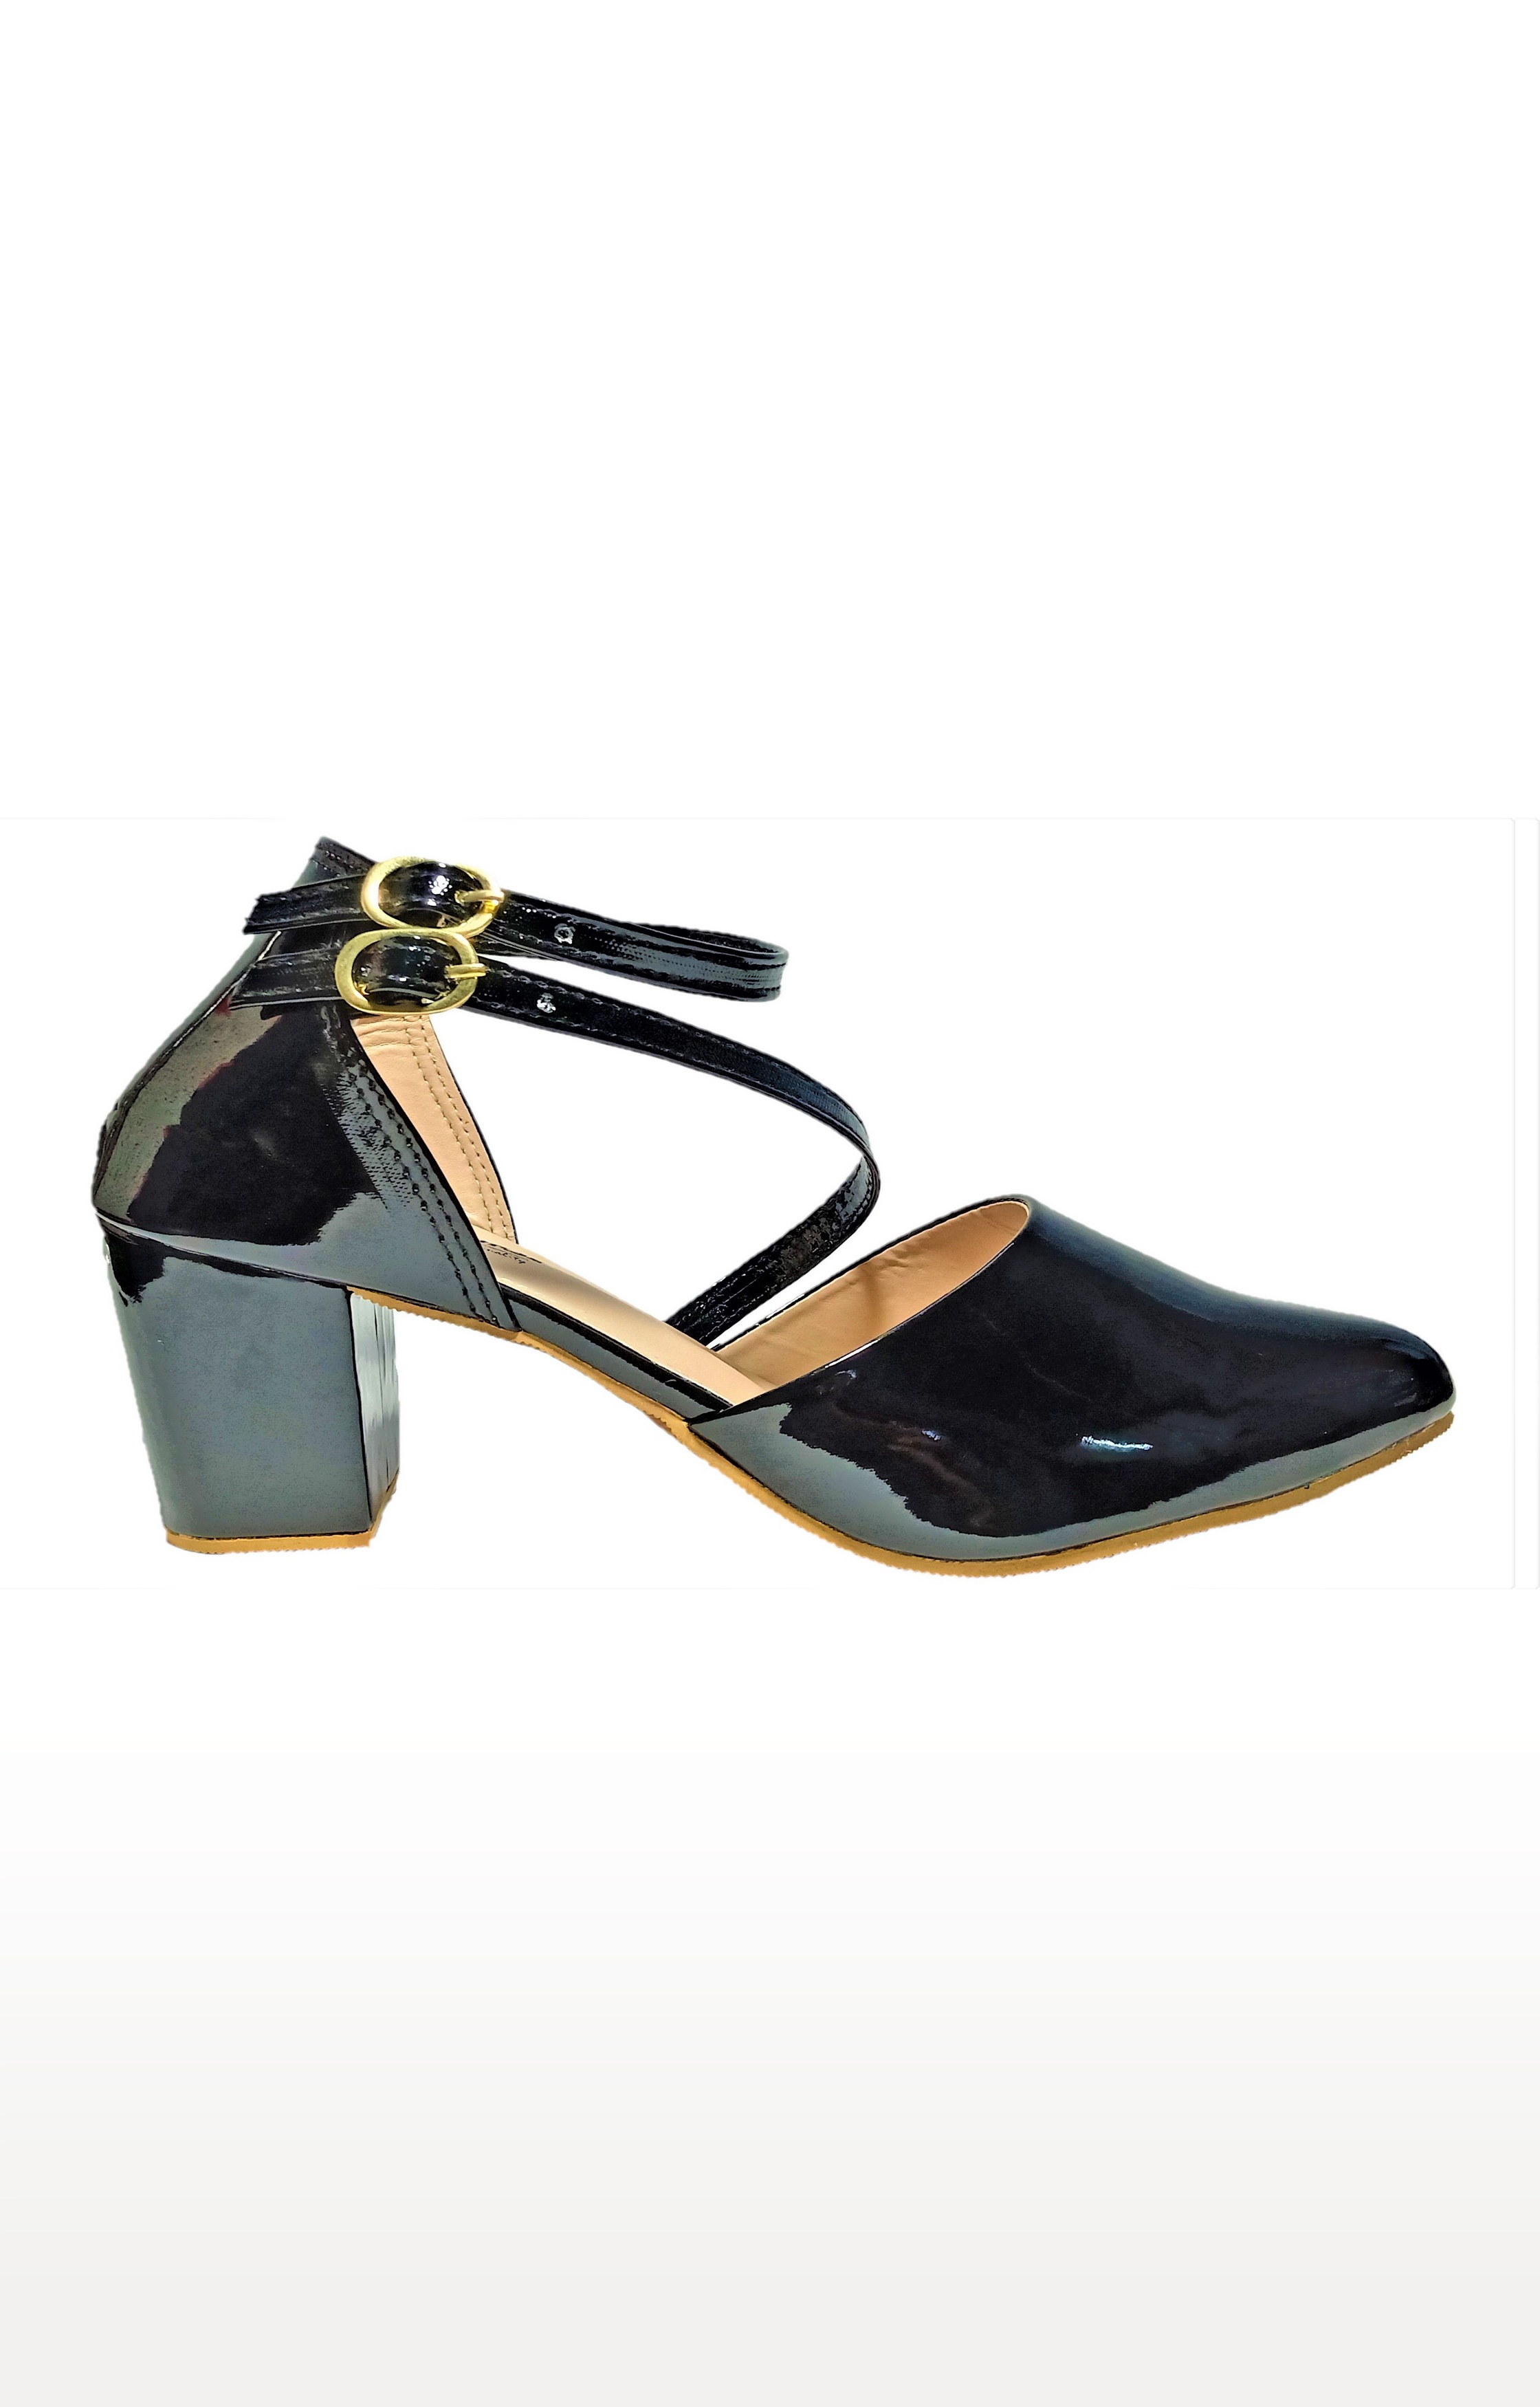 Buckle Block Heel Sandals for Summer Outfits